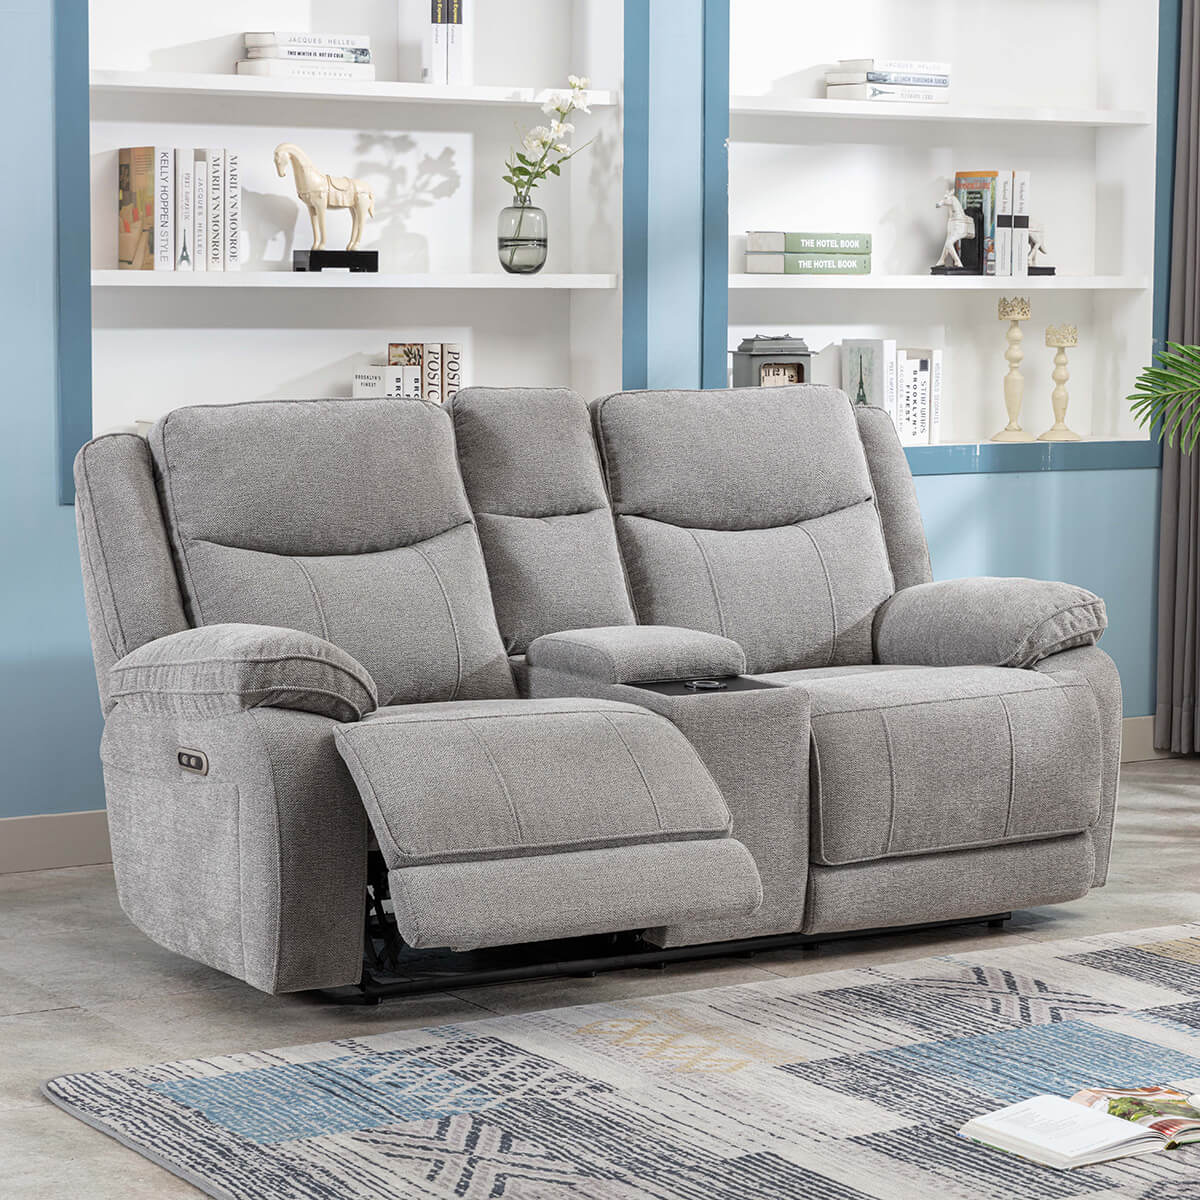 Herbert 2 Seater with Console - Light Grey